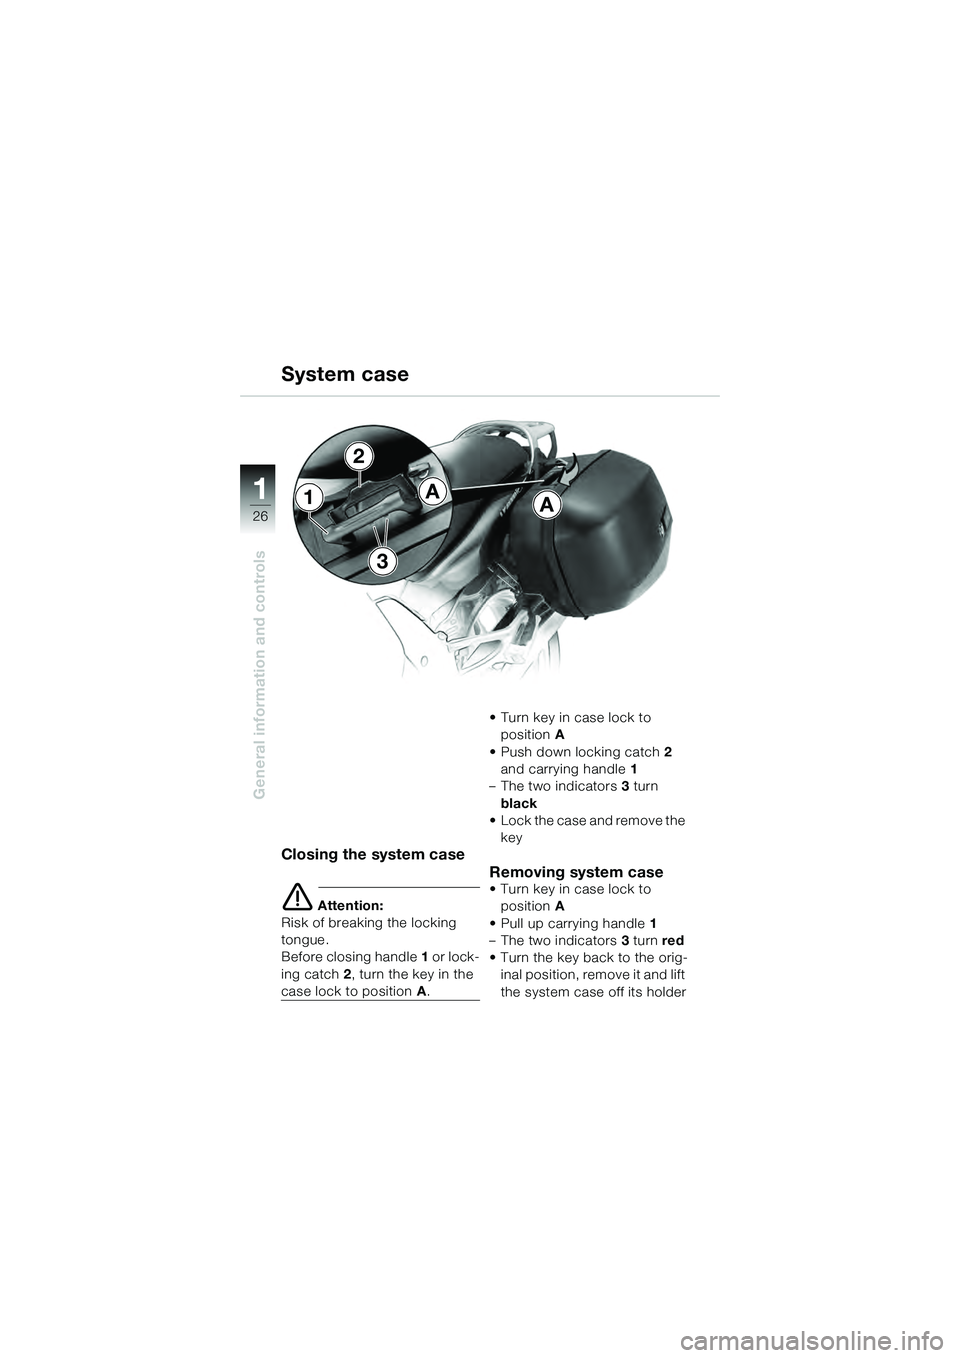 BMW MOTORRAD K 1200 GT 2004  Riders Manual (in English) 26
General information and controls
1
Closing the system case
 Attention:
Risk of breaking the locking 
tongue.
Before closing handle  1 or lock-
ing catch  2, turn the key in the 
case lock to posit